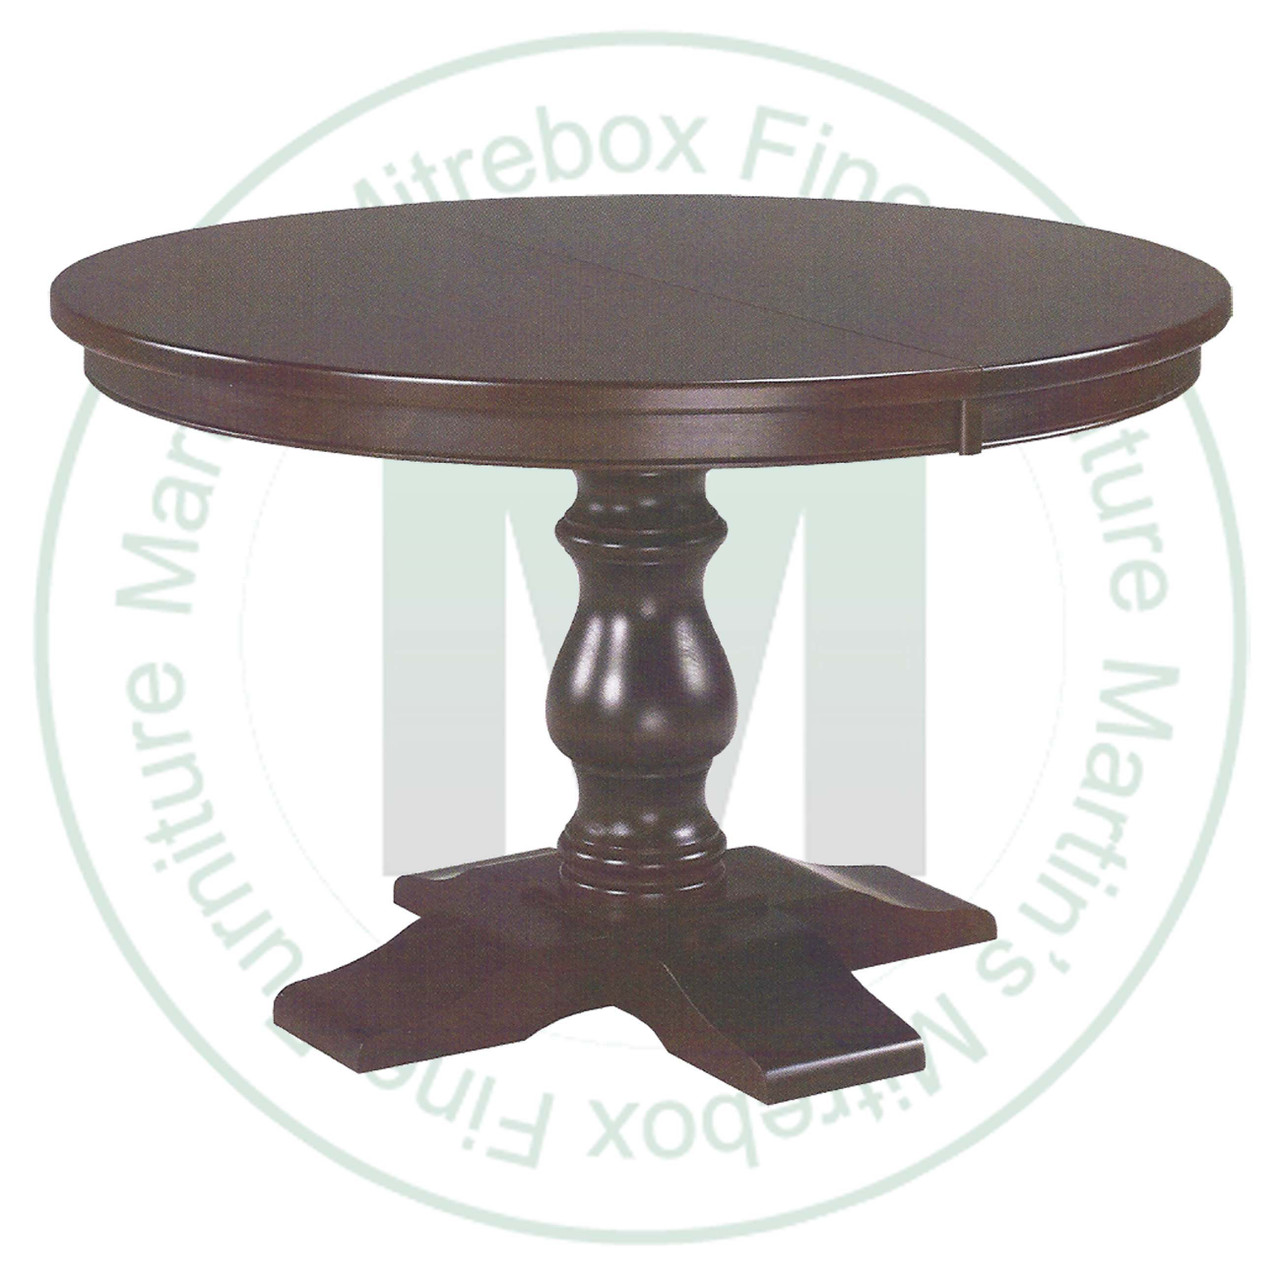 Wormy Maple Savannah Single Pedestal Table 54''D x 54''W x 30''H With 2 - 12'' Leaves Table